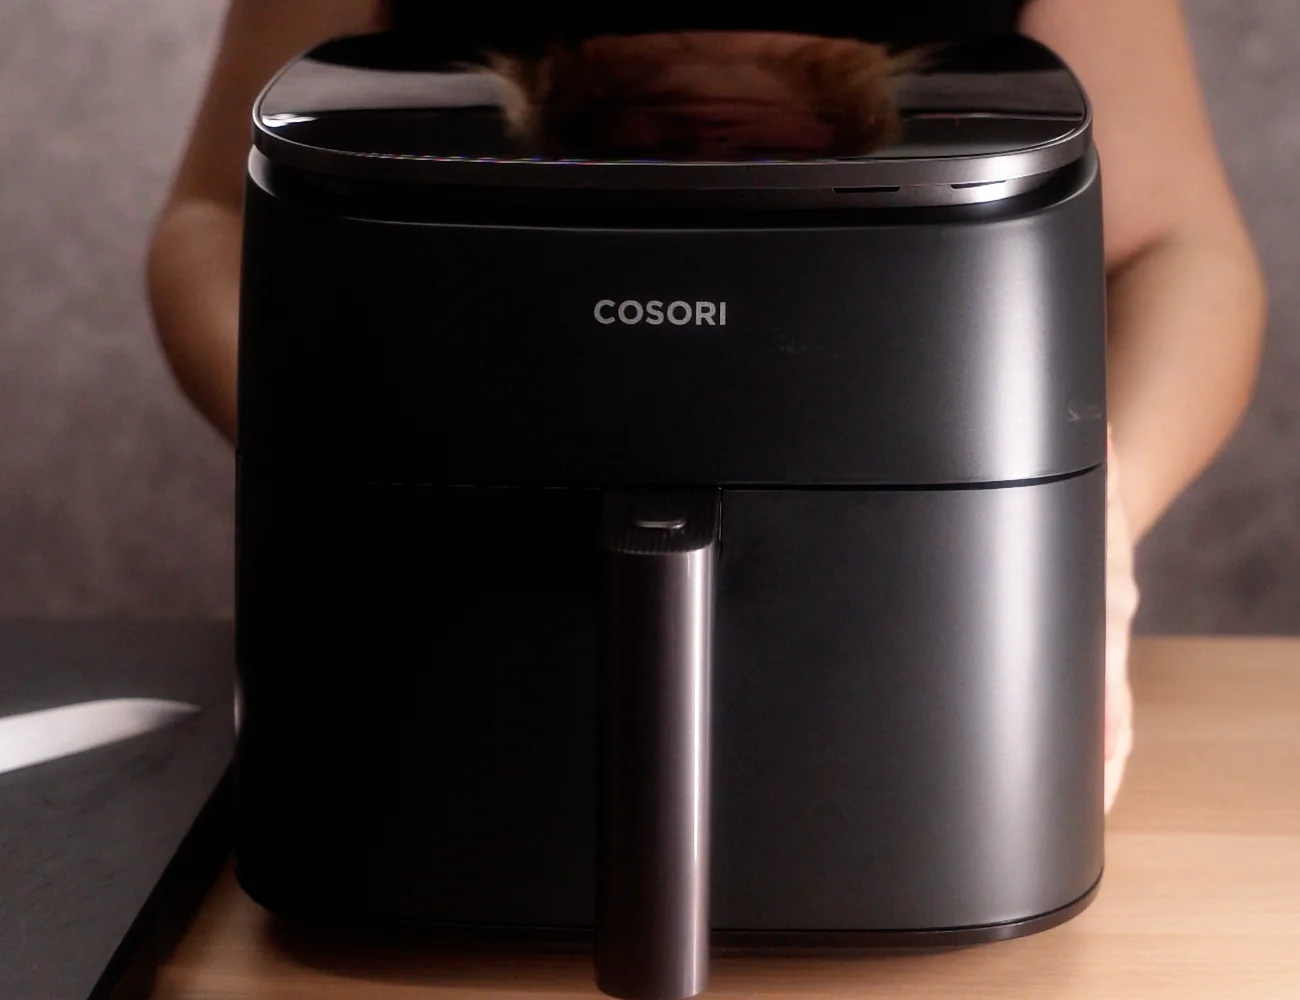 Cosori Turbo Blaze Air Fryer: 46% Faster Cooking Test Results